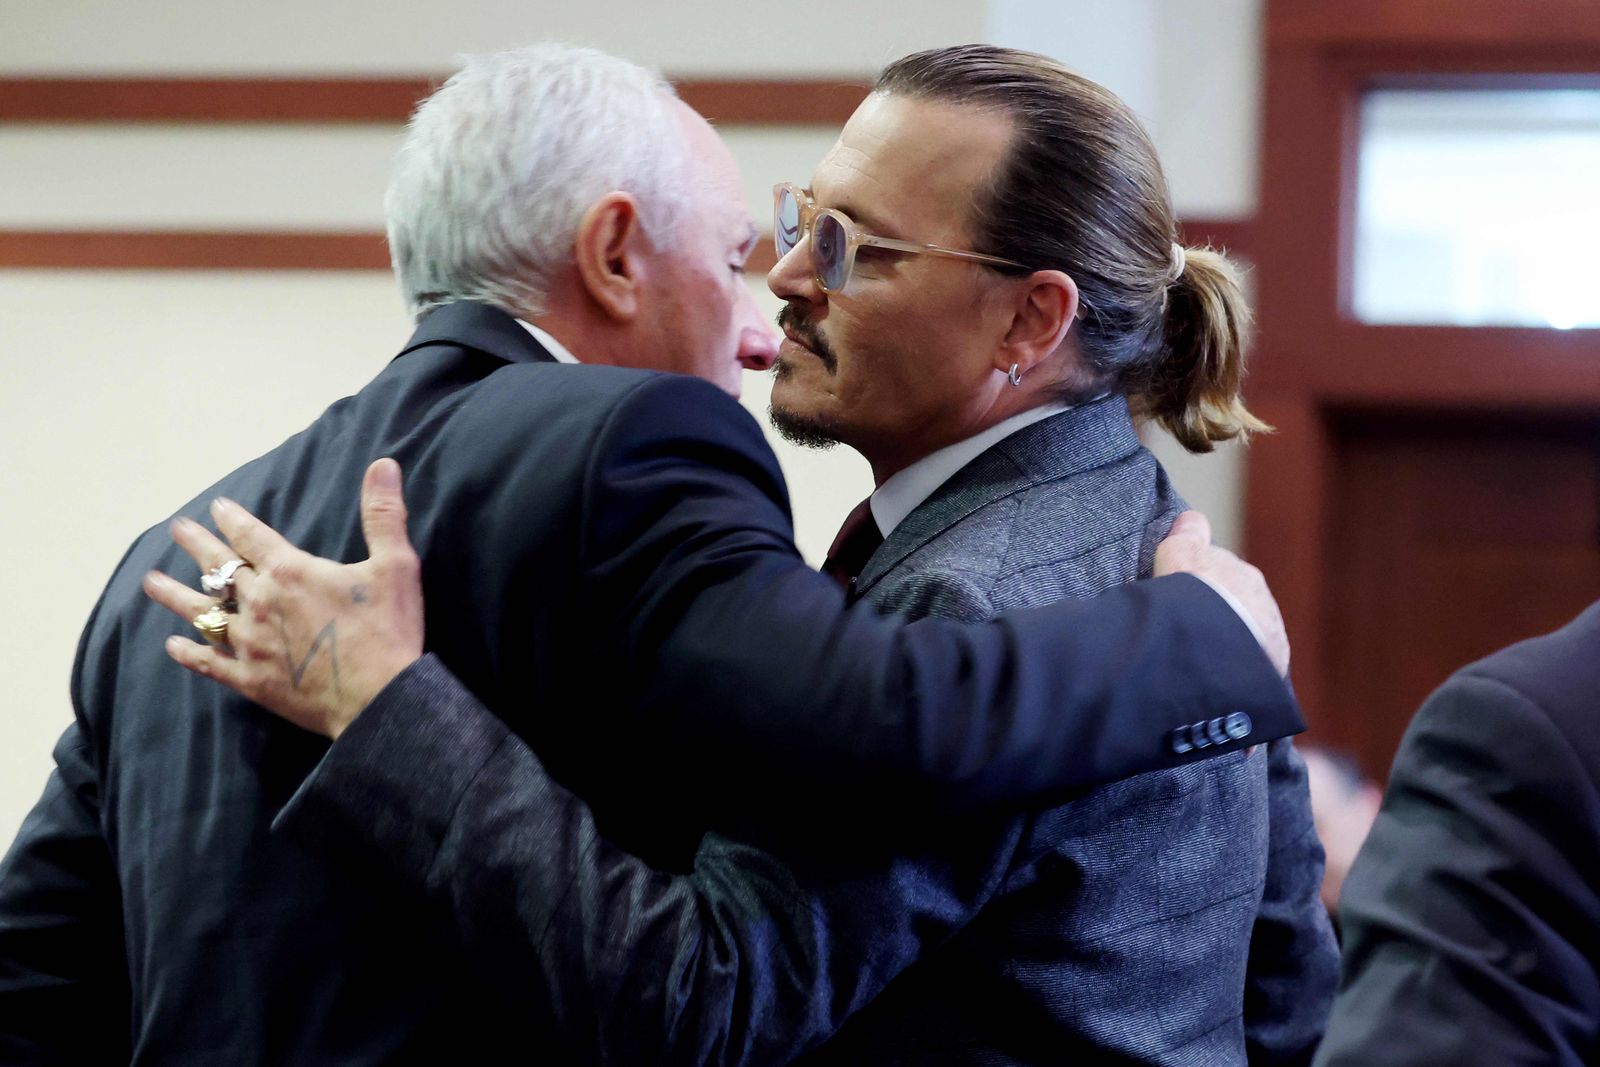 US actor Johnny Depp (R) embraces his business manager Edward White (L) as court finishes for the day during the 50 million US dollar Depp vs Heard defamation trial at the Fairfax County Circuit Court in Fairfax, Virginia, April 28, 2022. - US actor Johnny Depp sued his ex-wife Amber Heard for libel in Fairfax County Circuit Court after she wrote an op-ed piece in The Washington Post in 2018 referring to herself as a 